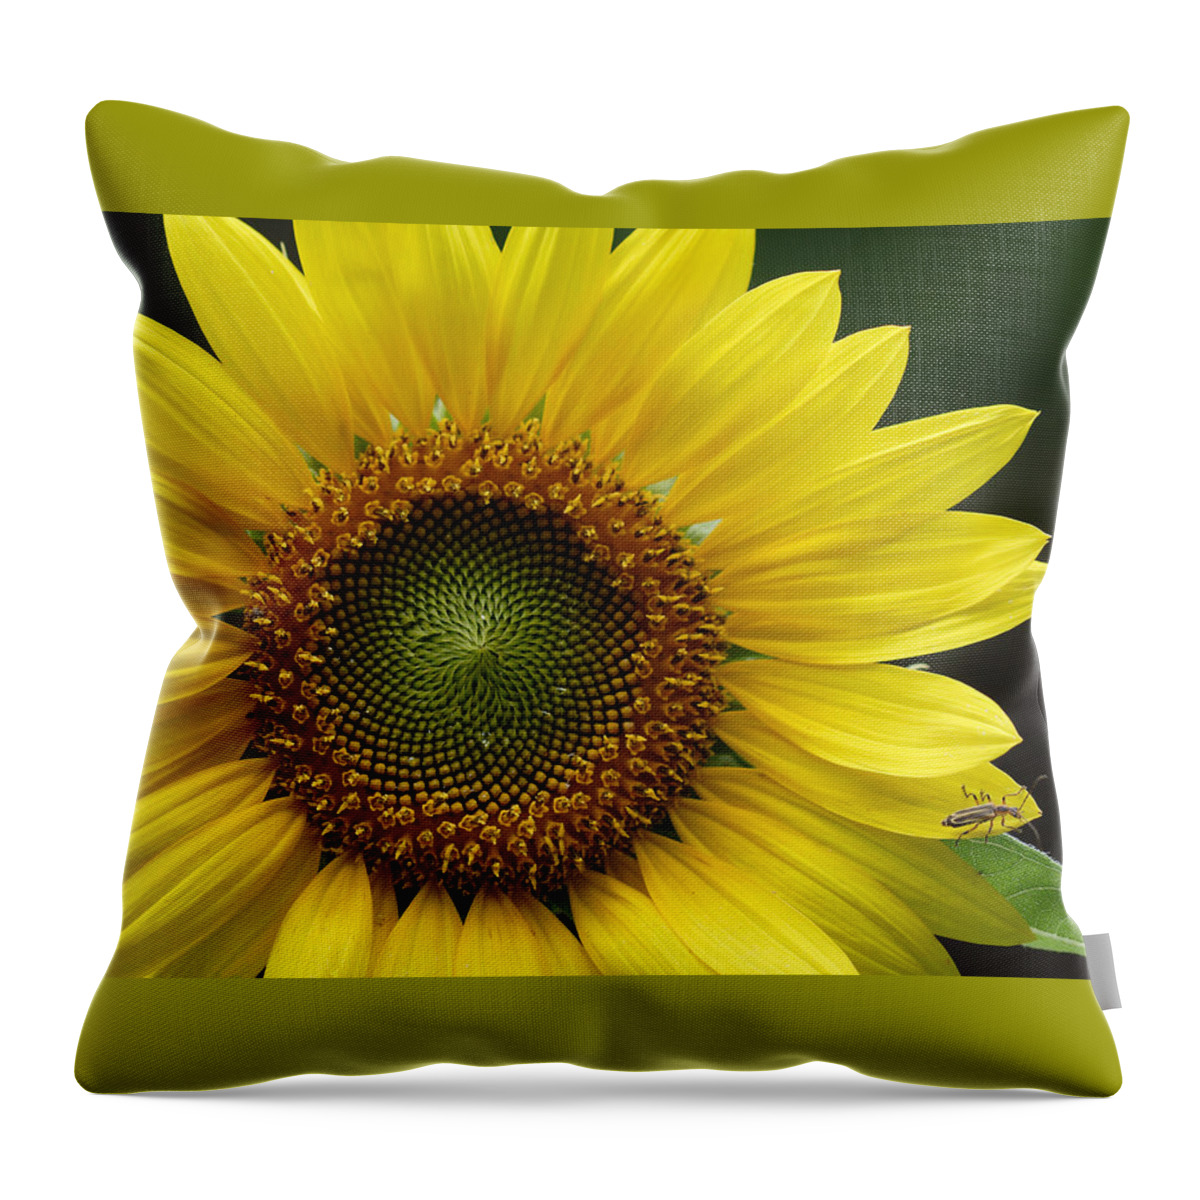 Helianthus Annuus Throw Pillow featuring the photograph Sunflower With Insect by Daniel Reed